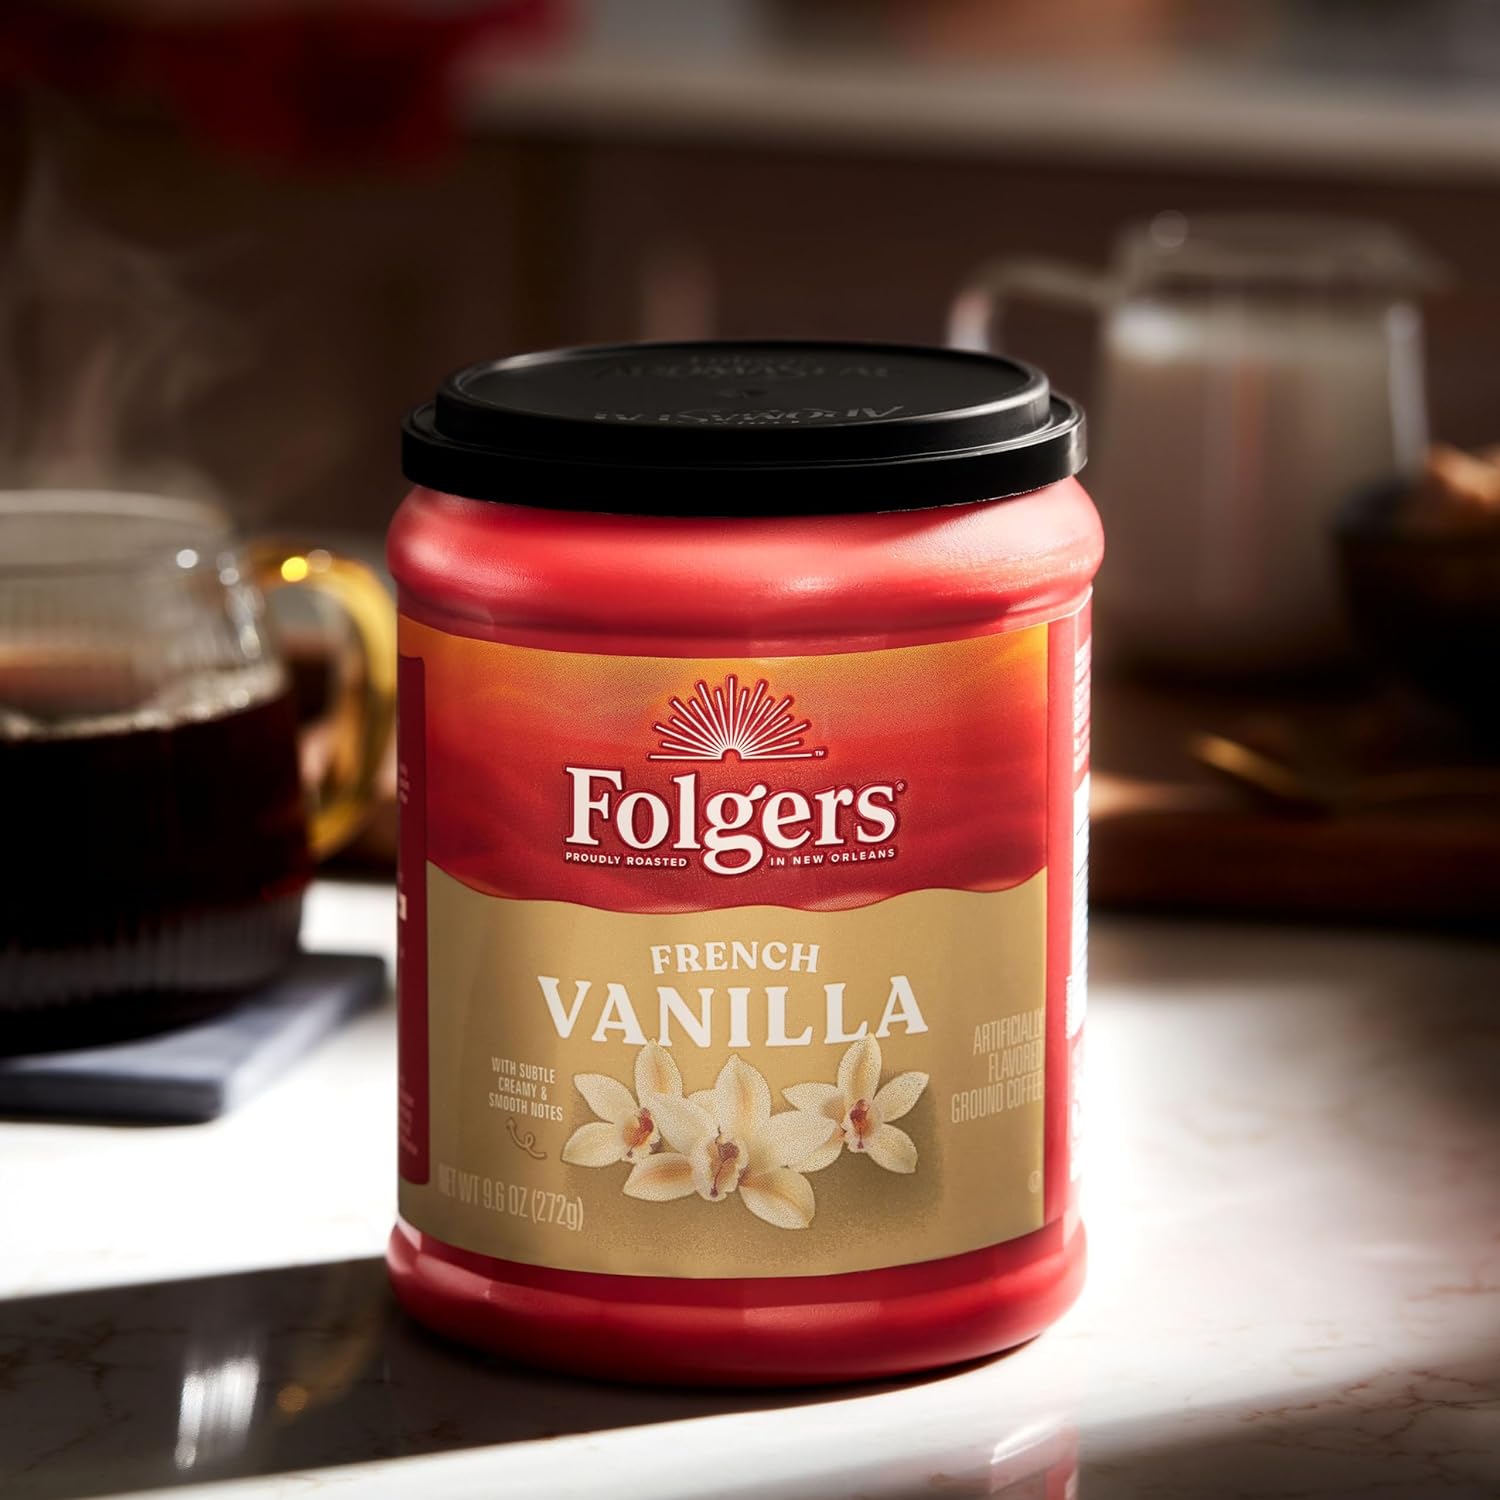 Folgers French Vanilla Flavored Ground Coffee, 9.6 Ounce Canister (Pack of 6) : Grocery & Gourmet Food